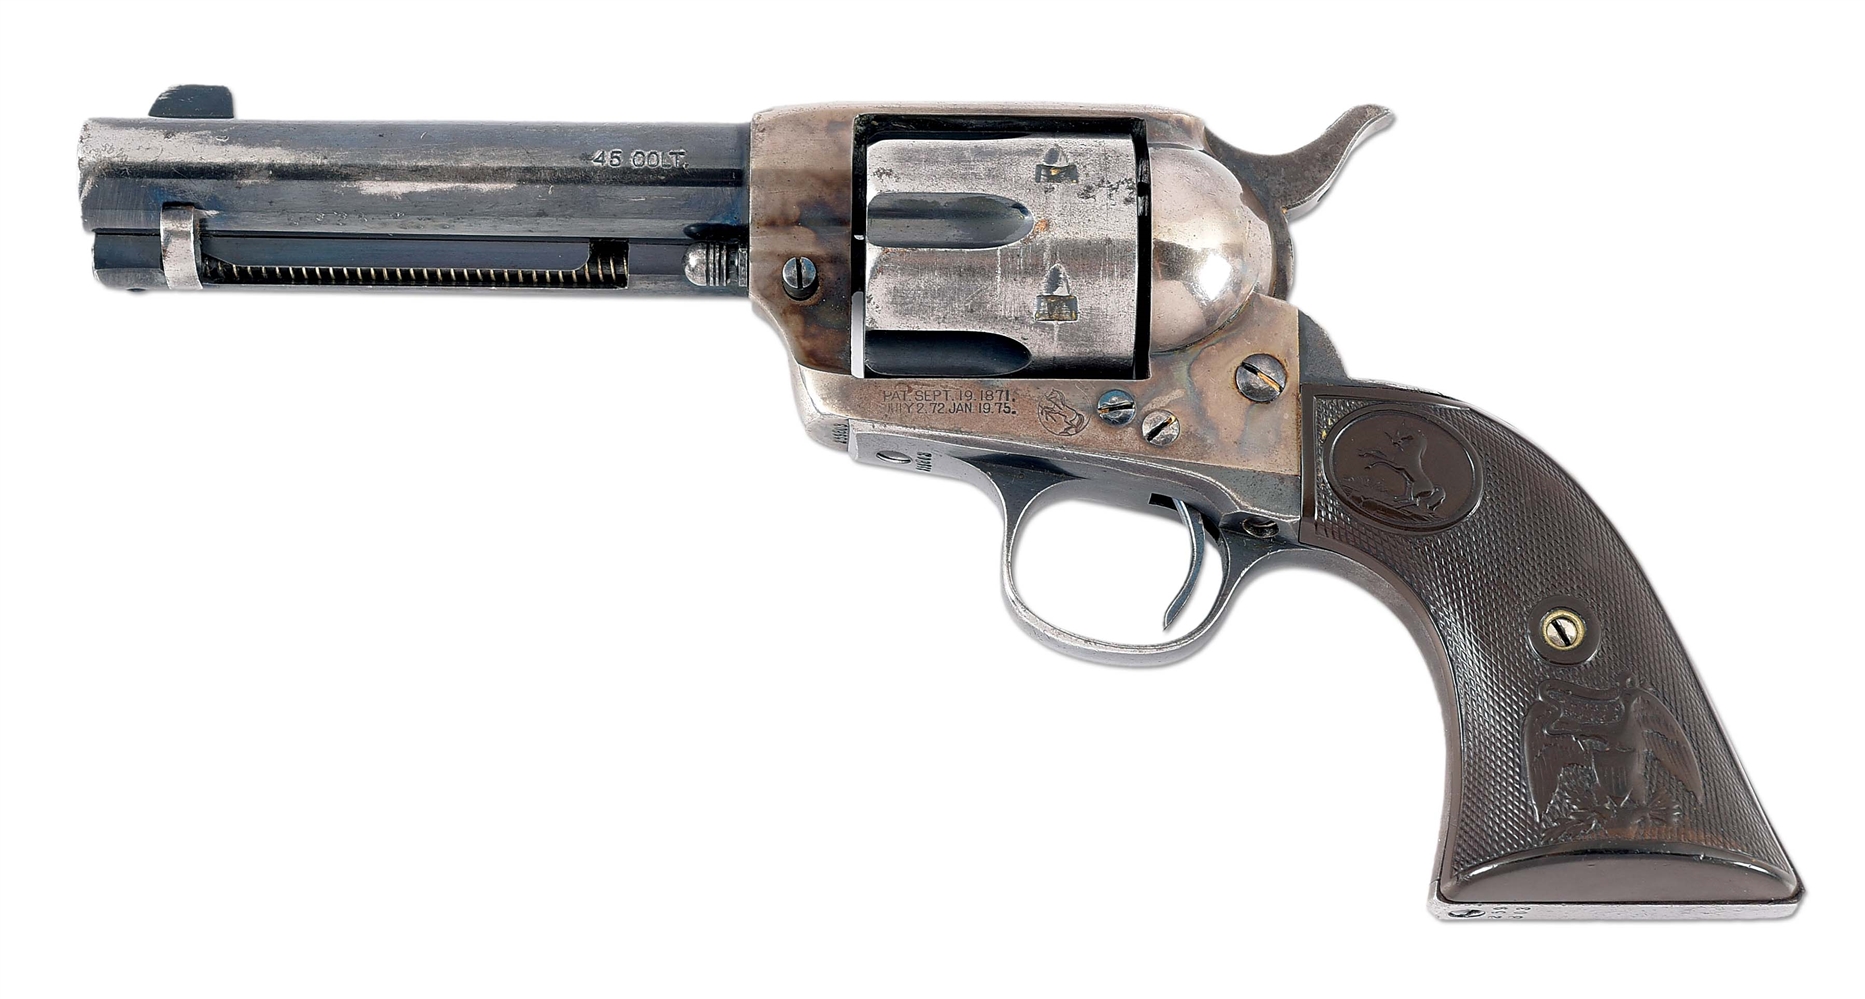 (C) WELLS FARGO MARKED COLT SINGLE ACTION ARMY REVOLVER.